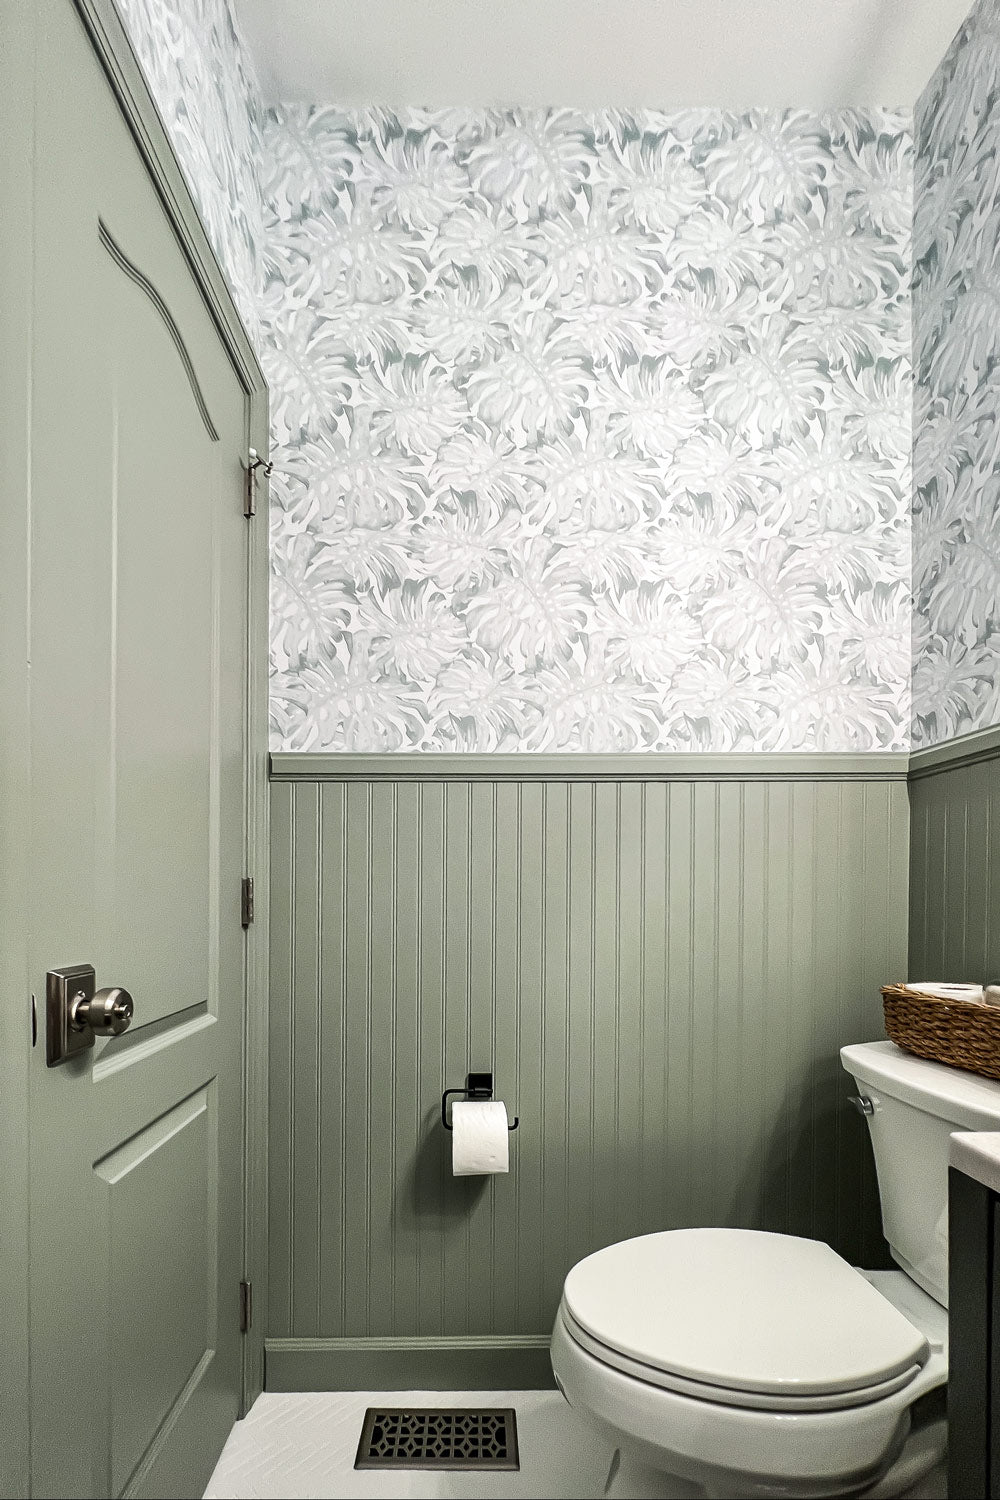 Removable wallpaper for bathrooms